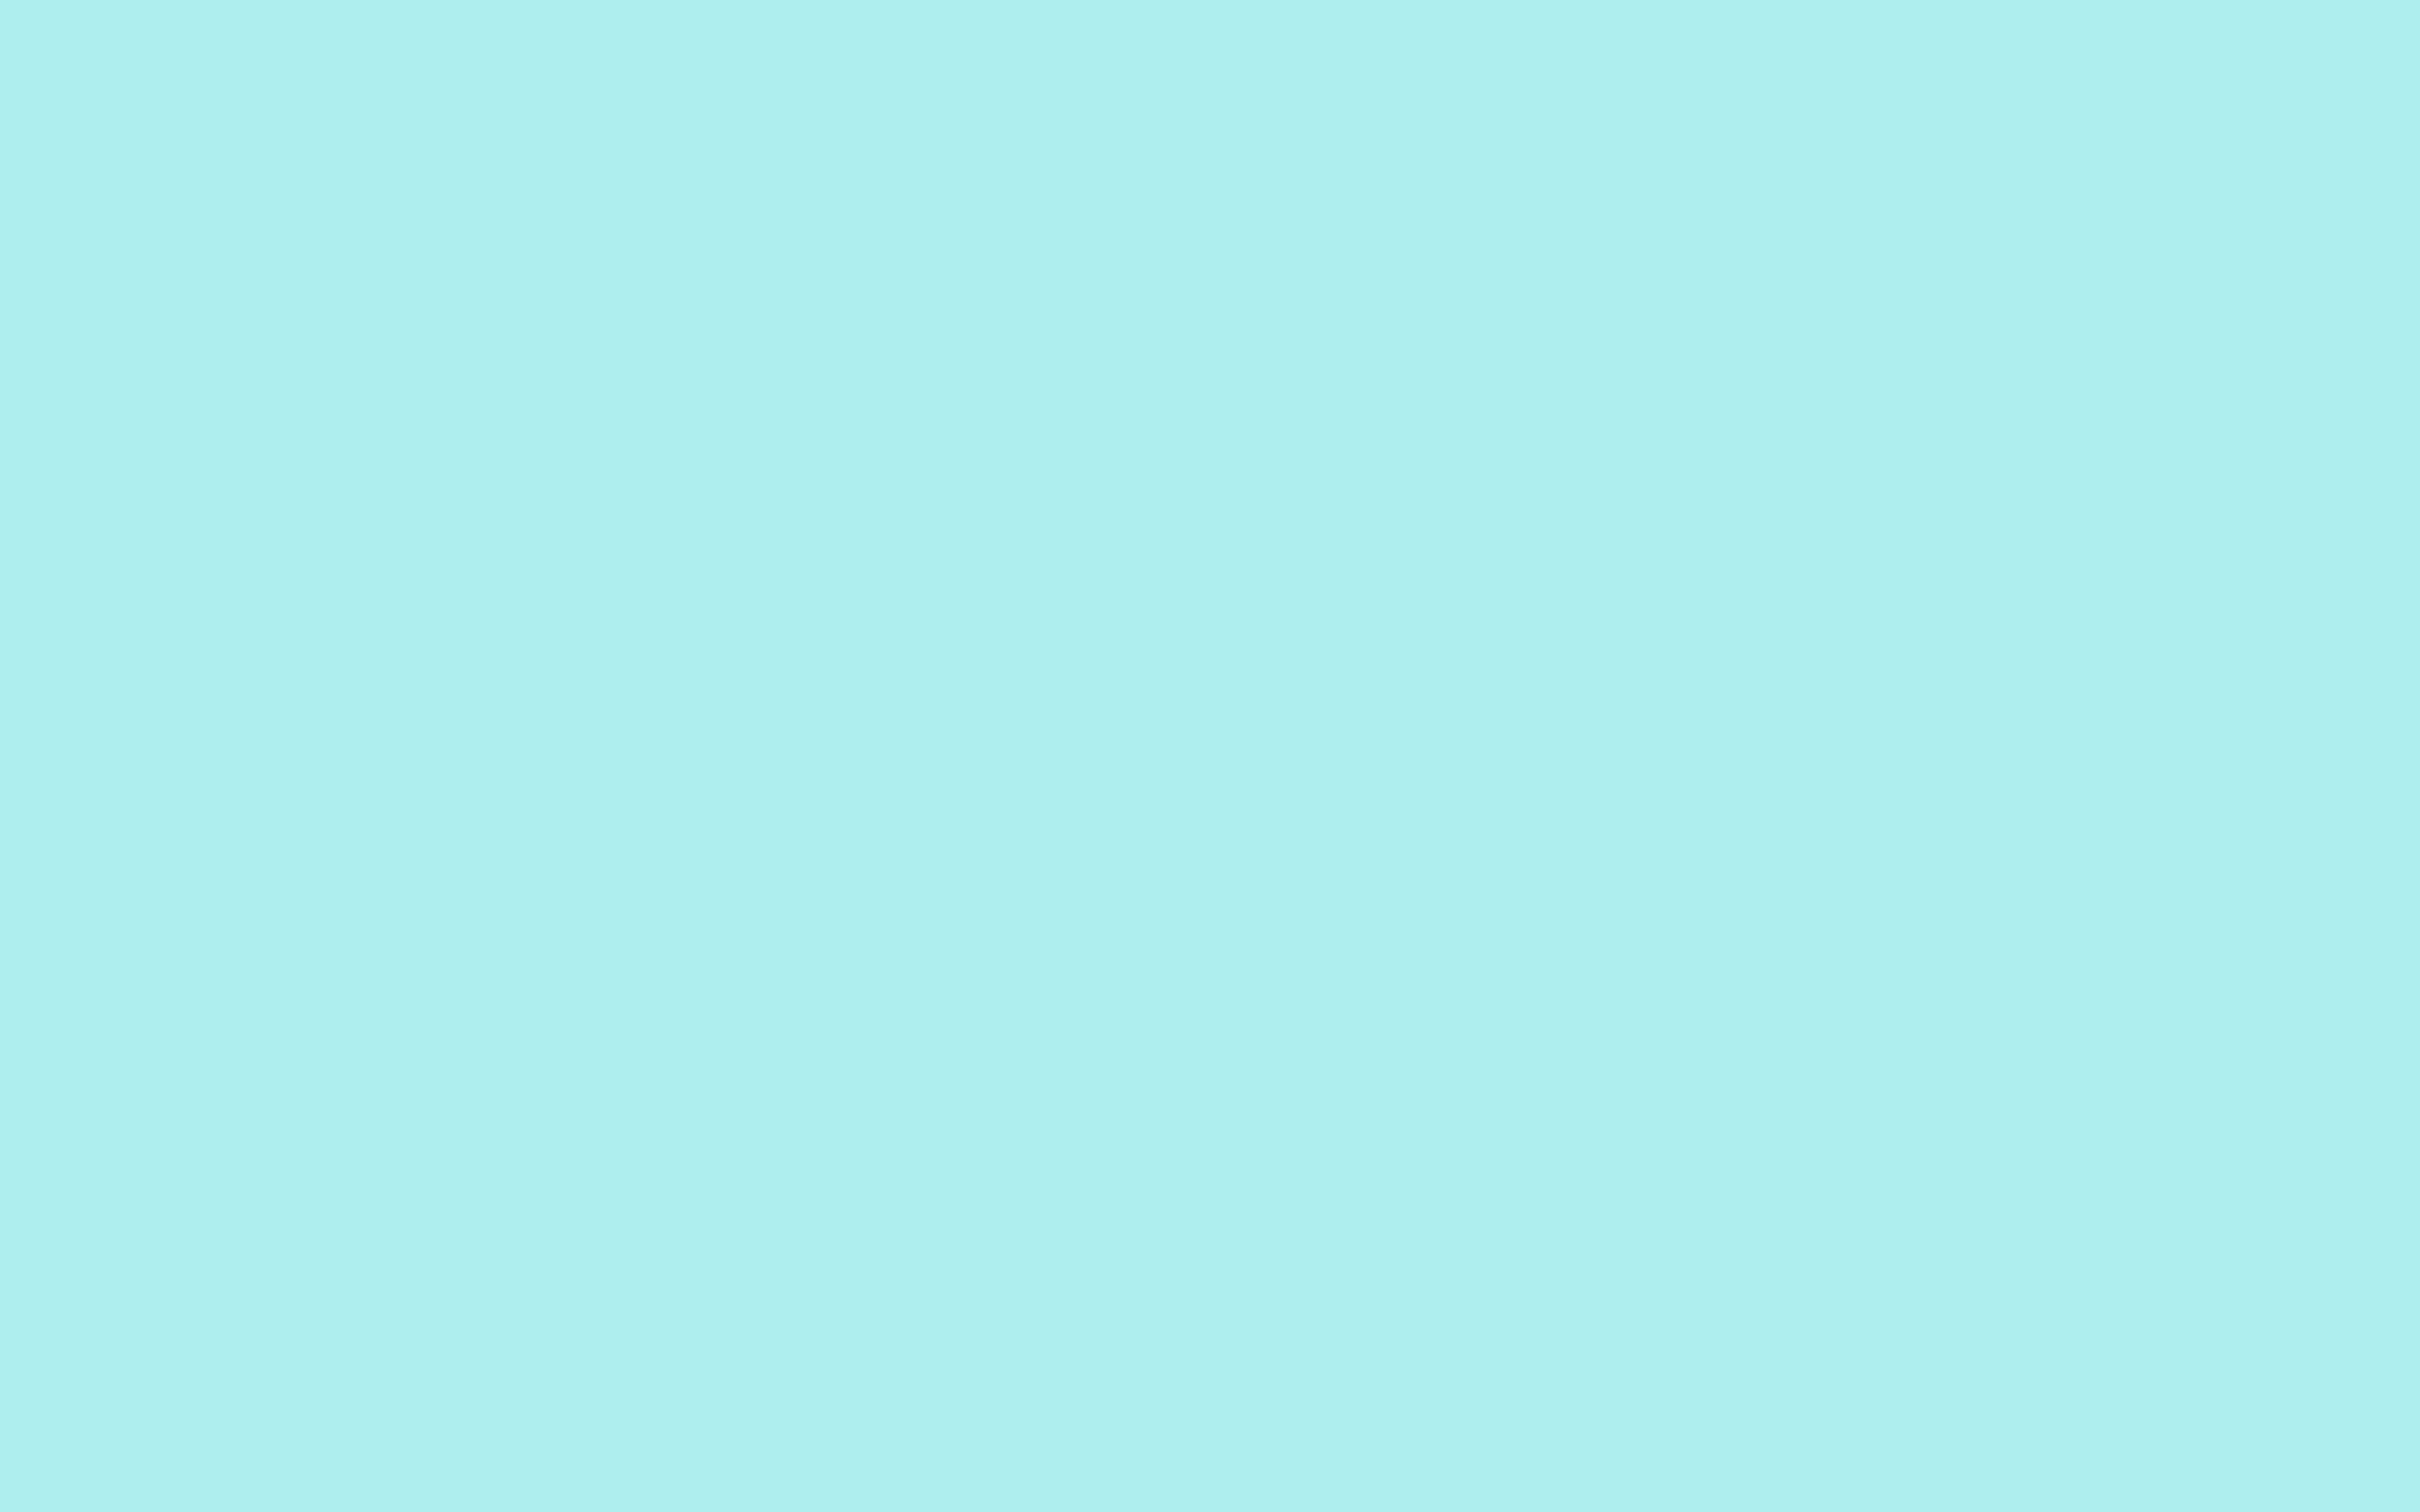 Free 2560x1600 resolution Pale Blue solid color background view and